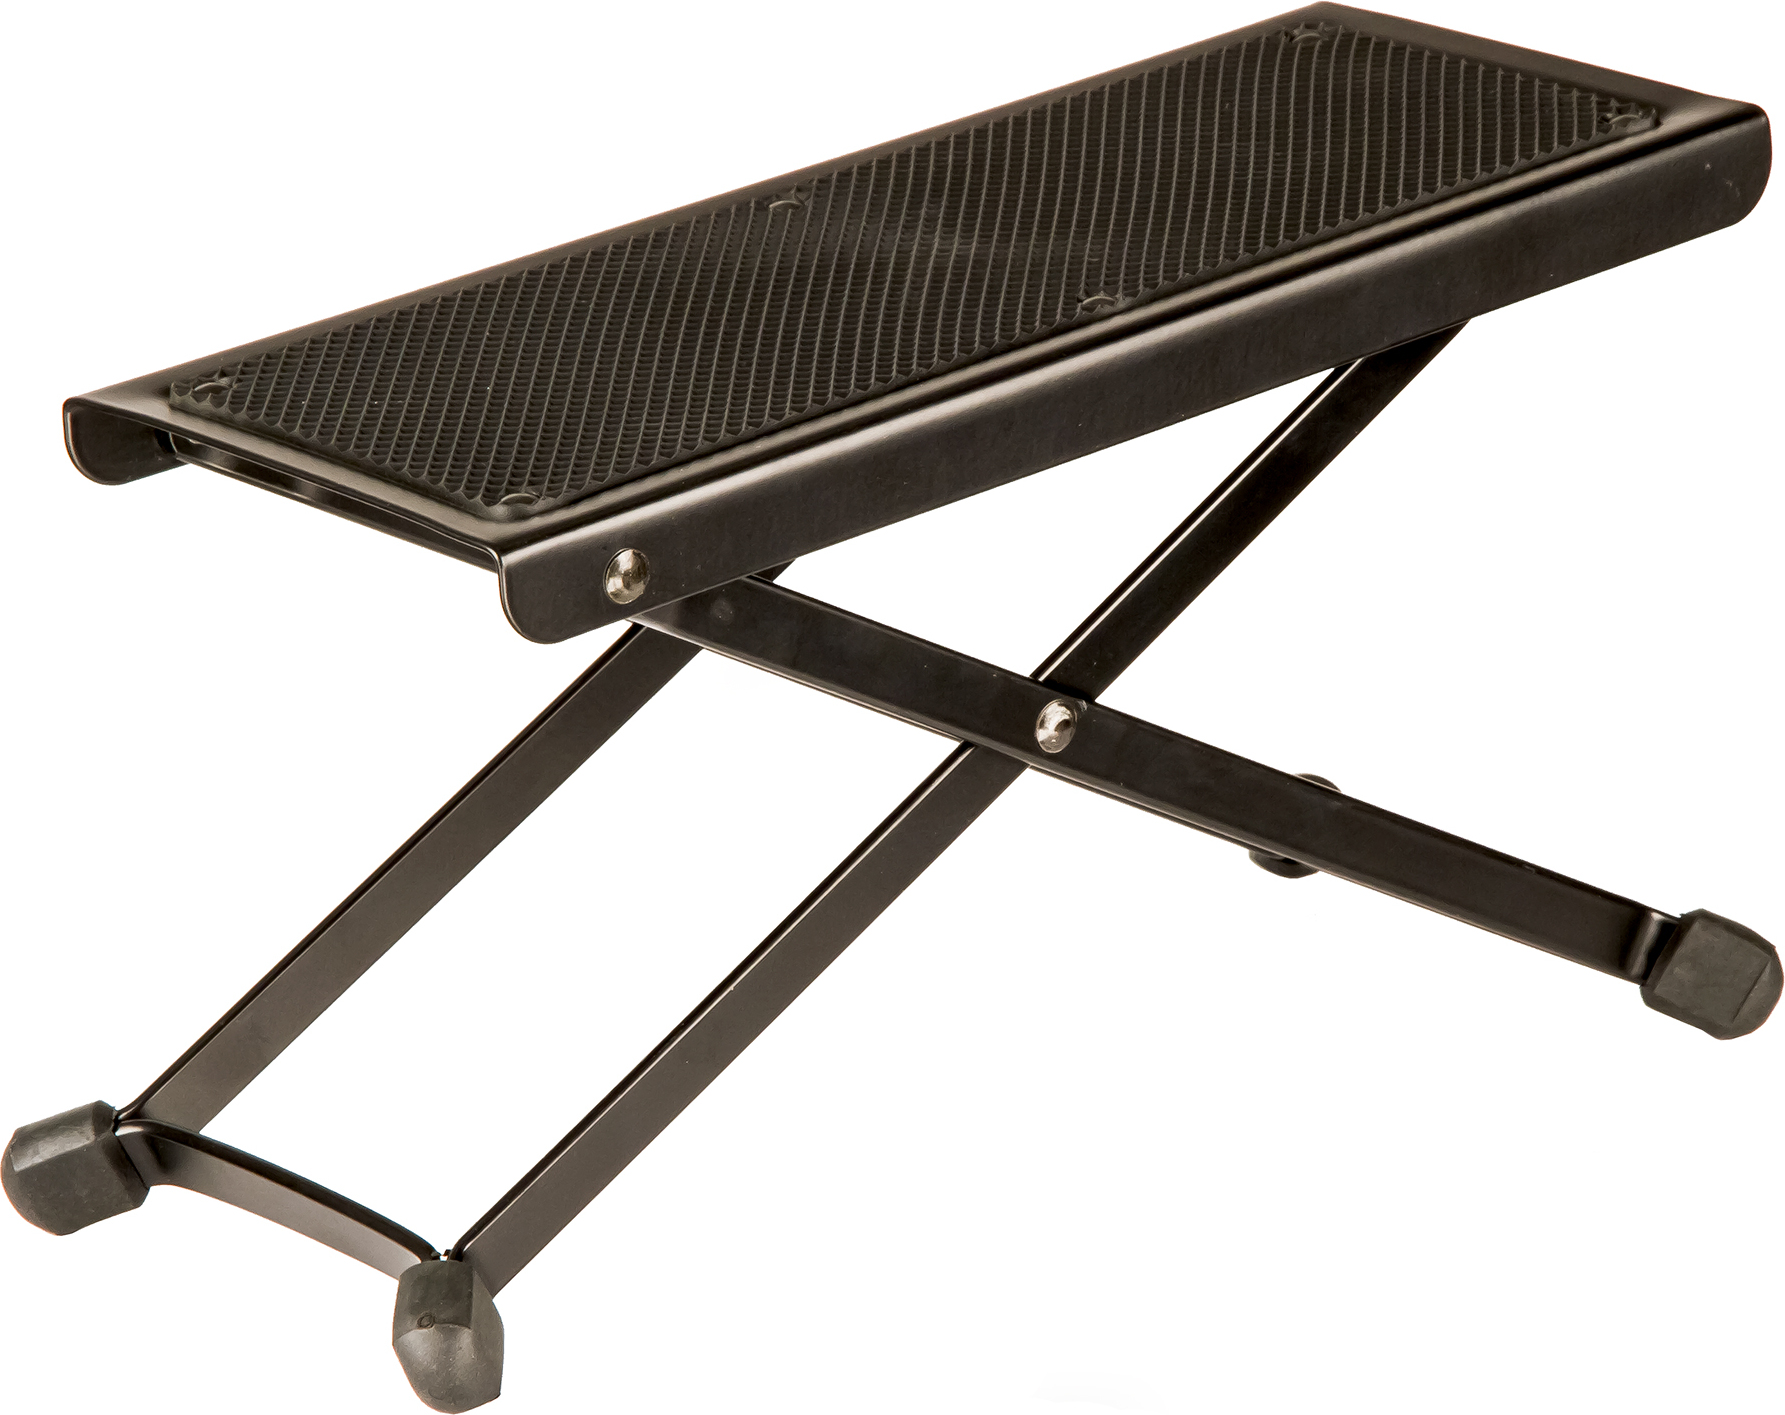 X-tone Xh6210 Repose Pied - Foot stool - Main picture